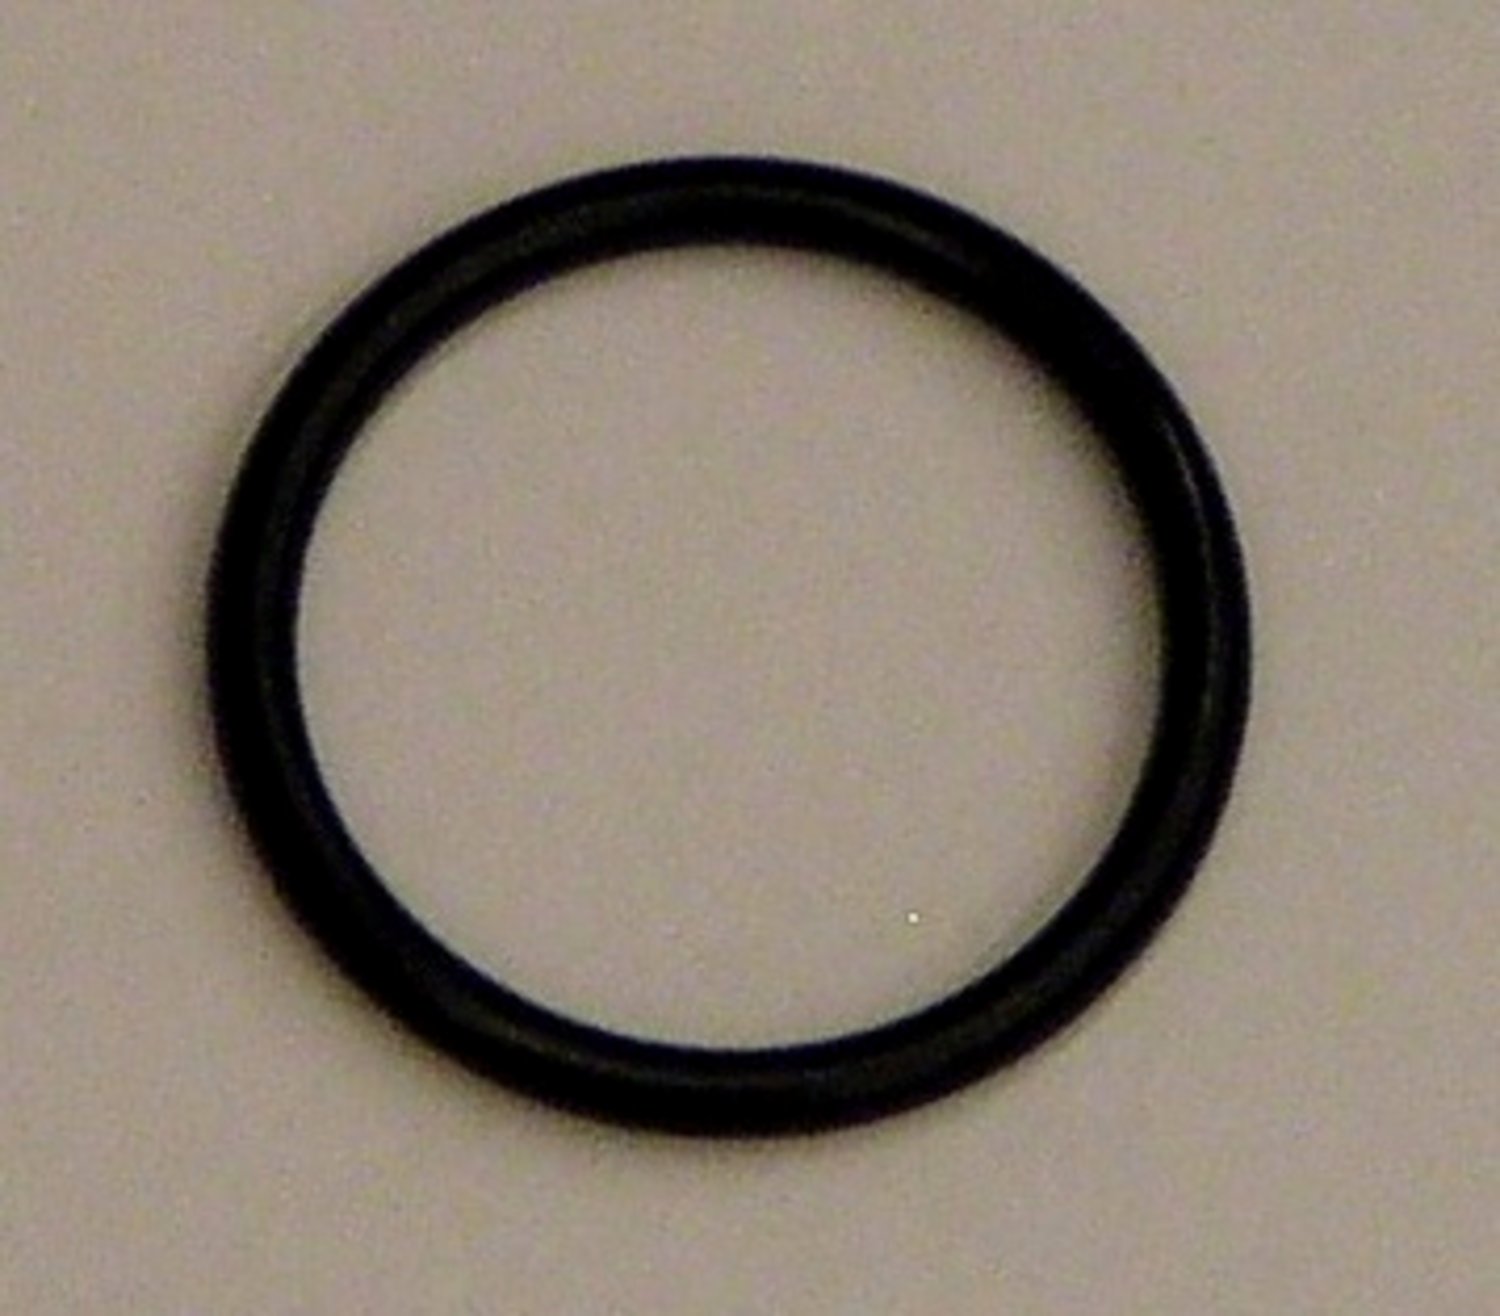 7010326375 - 3M O-Ring A0044, 14 mm x 1-1/2 mm